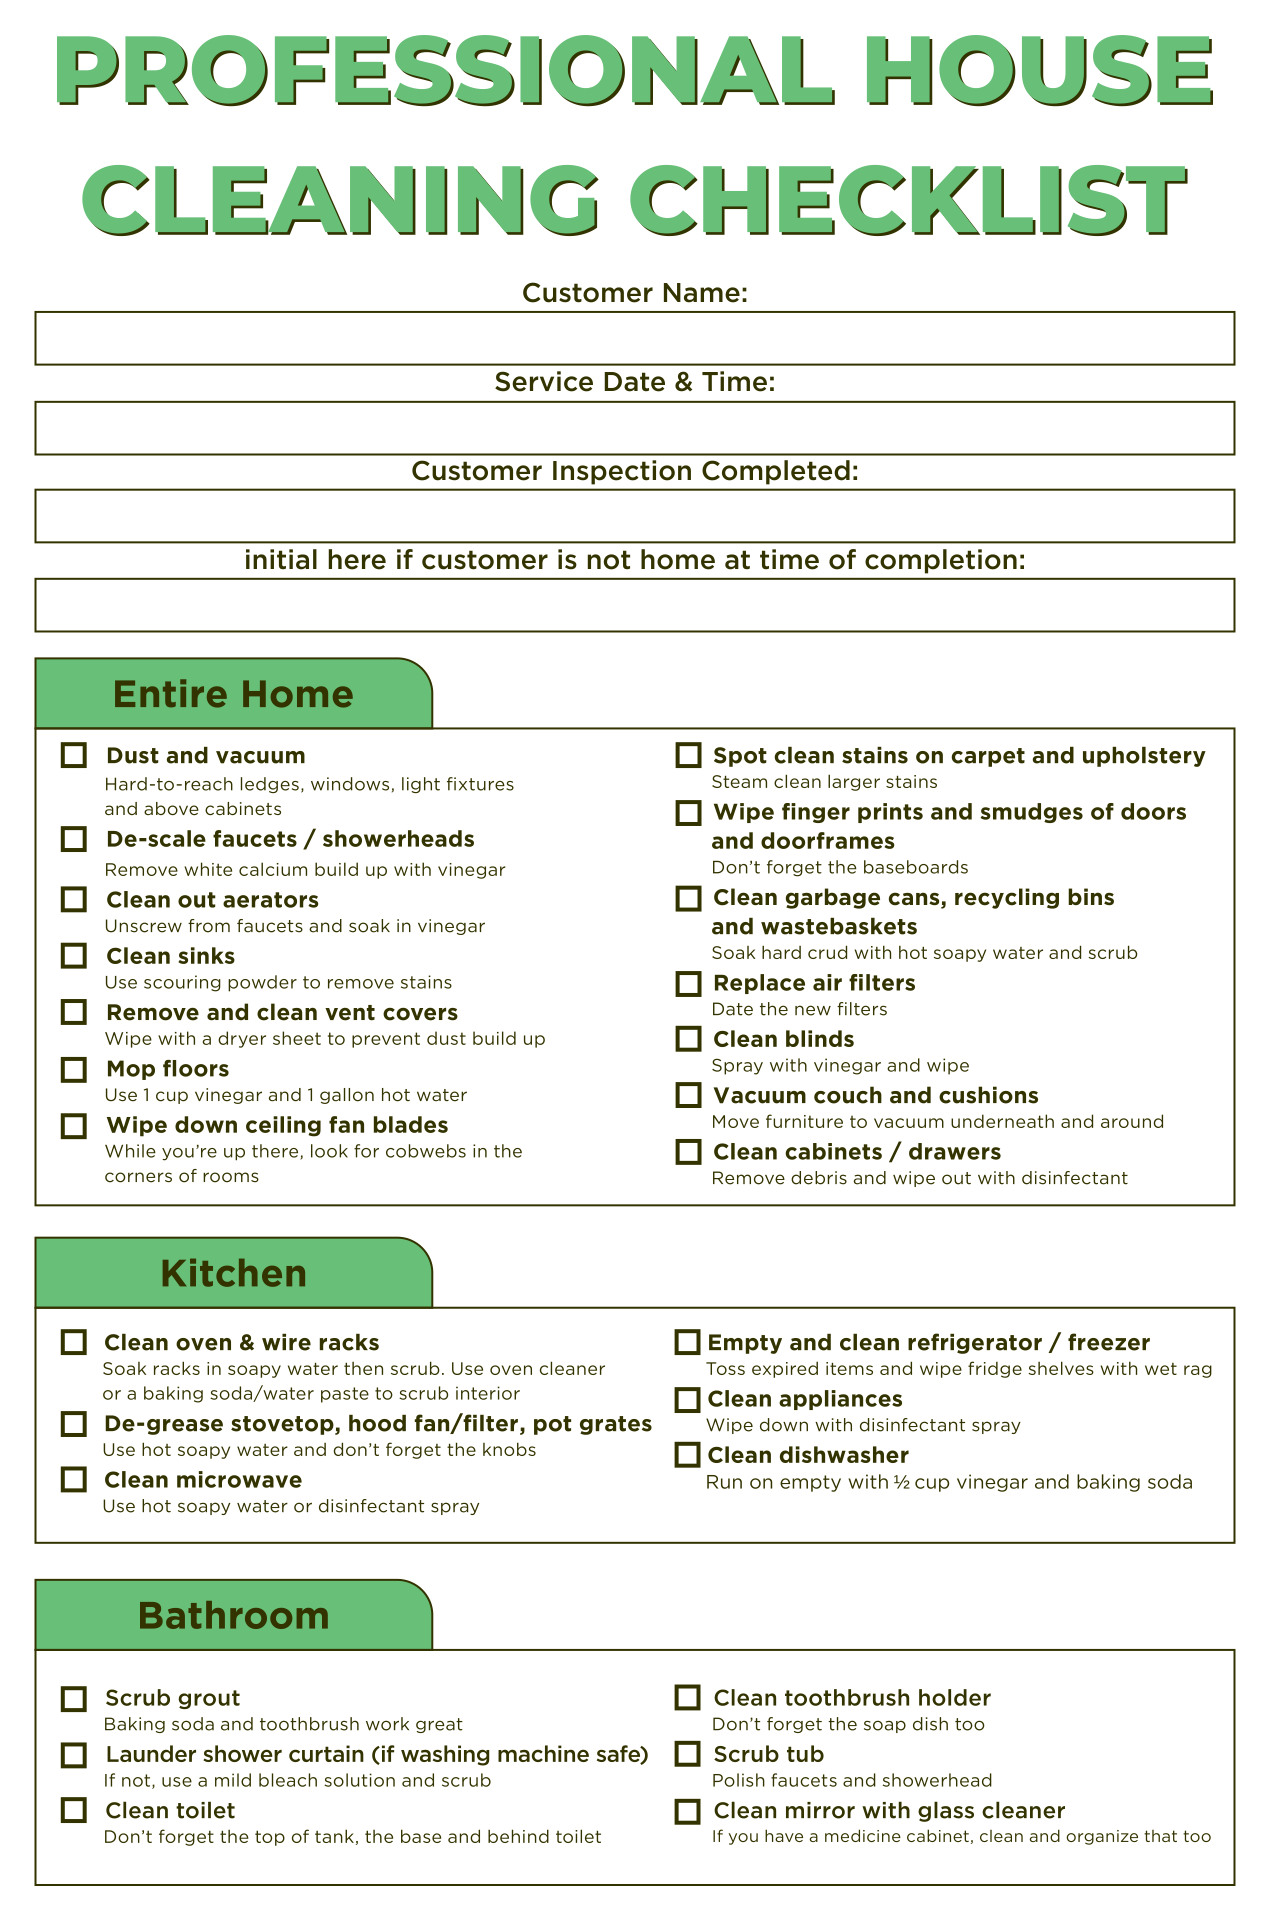 home-cleaning-checklist-free-40-printable-house-cleaning-checklist-templates-templatelab